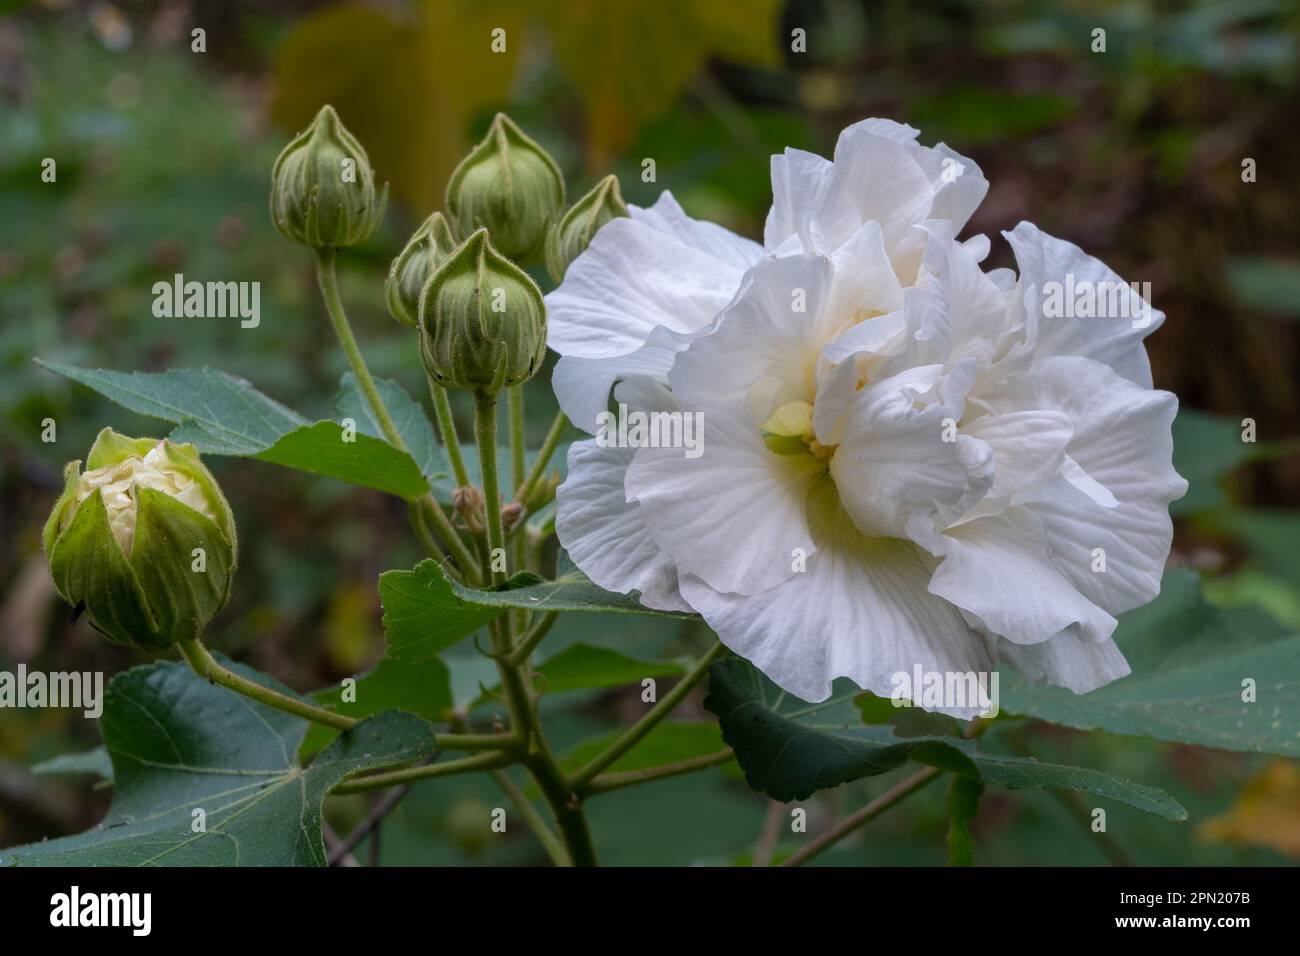 Closeup view of bright white tropical hibiscus mutabilis aka Confederate rose or Dixie rosemallow flower and buds outdoors on natural background Stock Photo